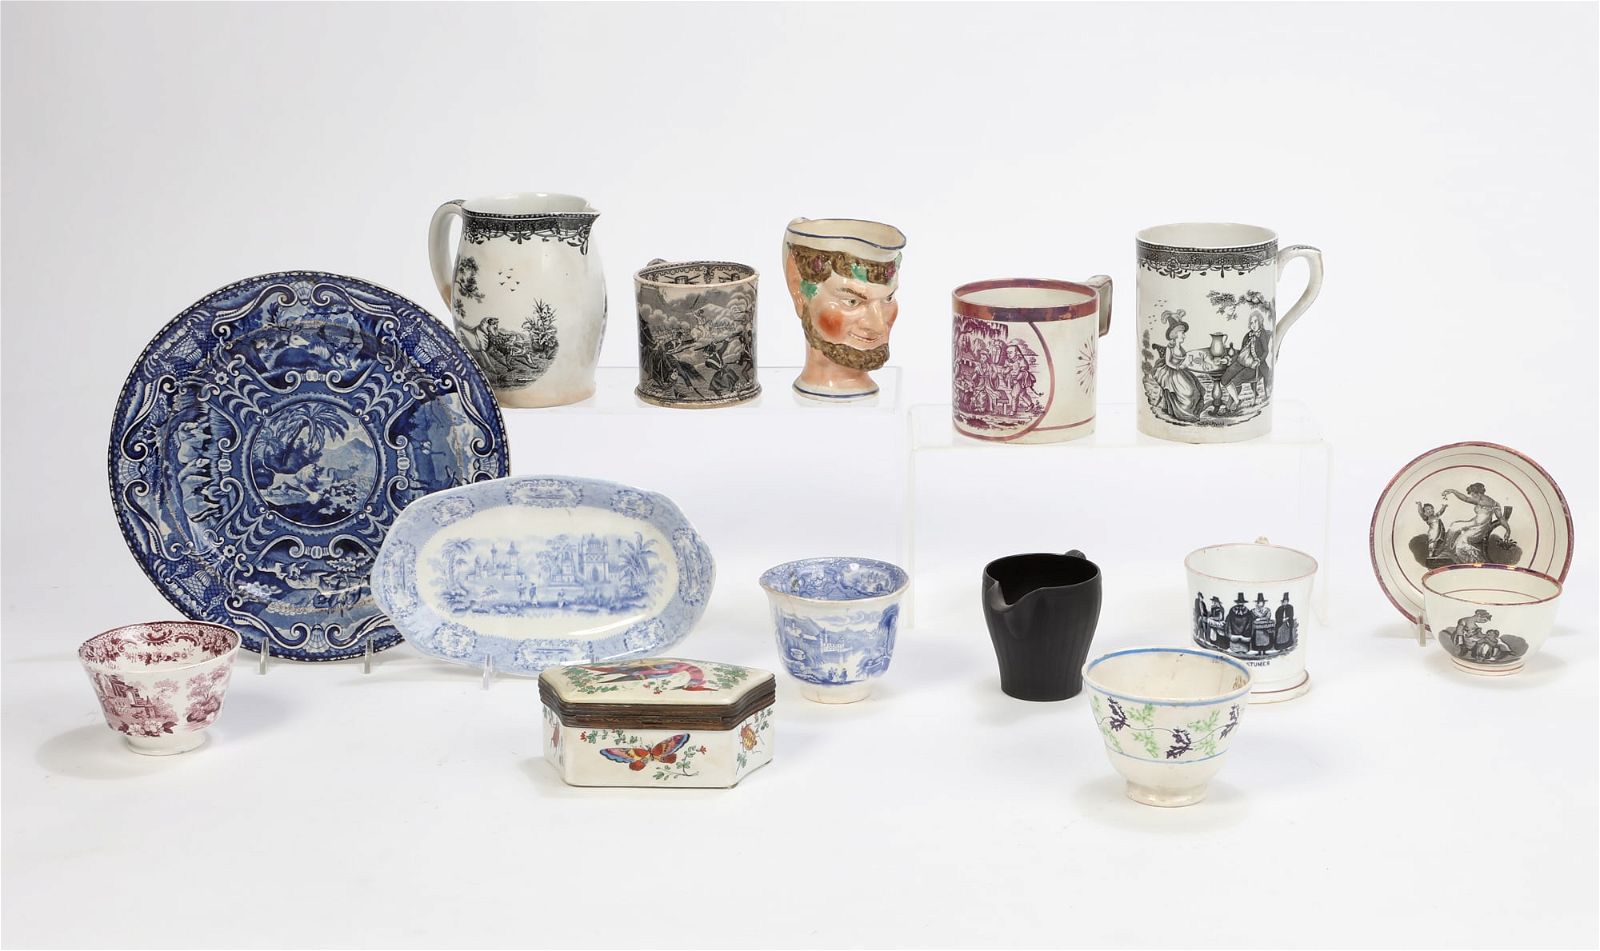 FIFTEEN ENGLISH PORCELAIN AND CERAMIC